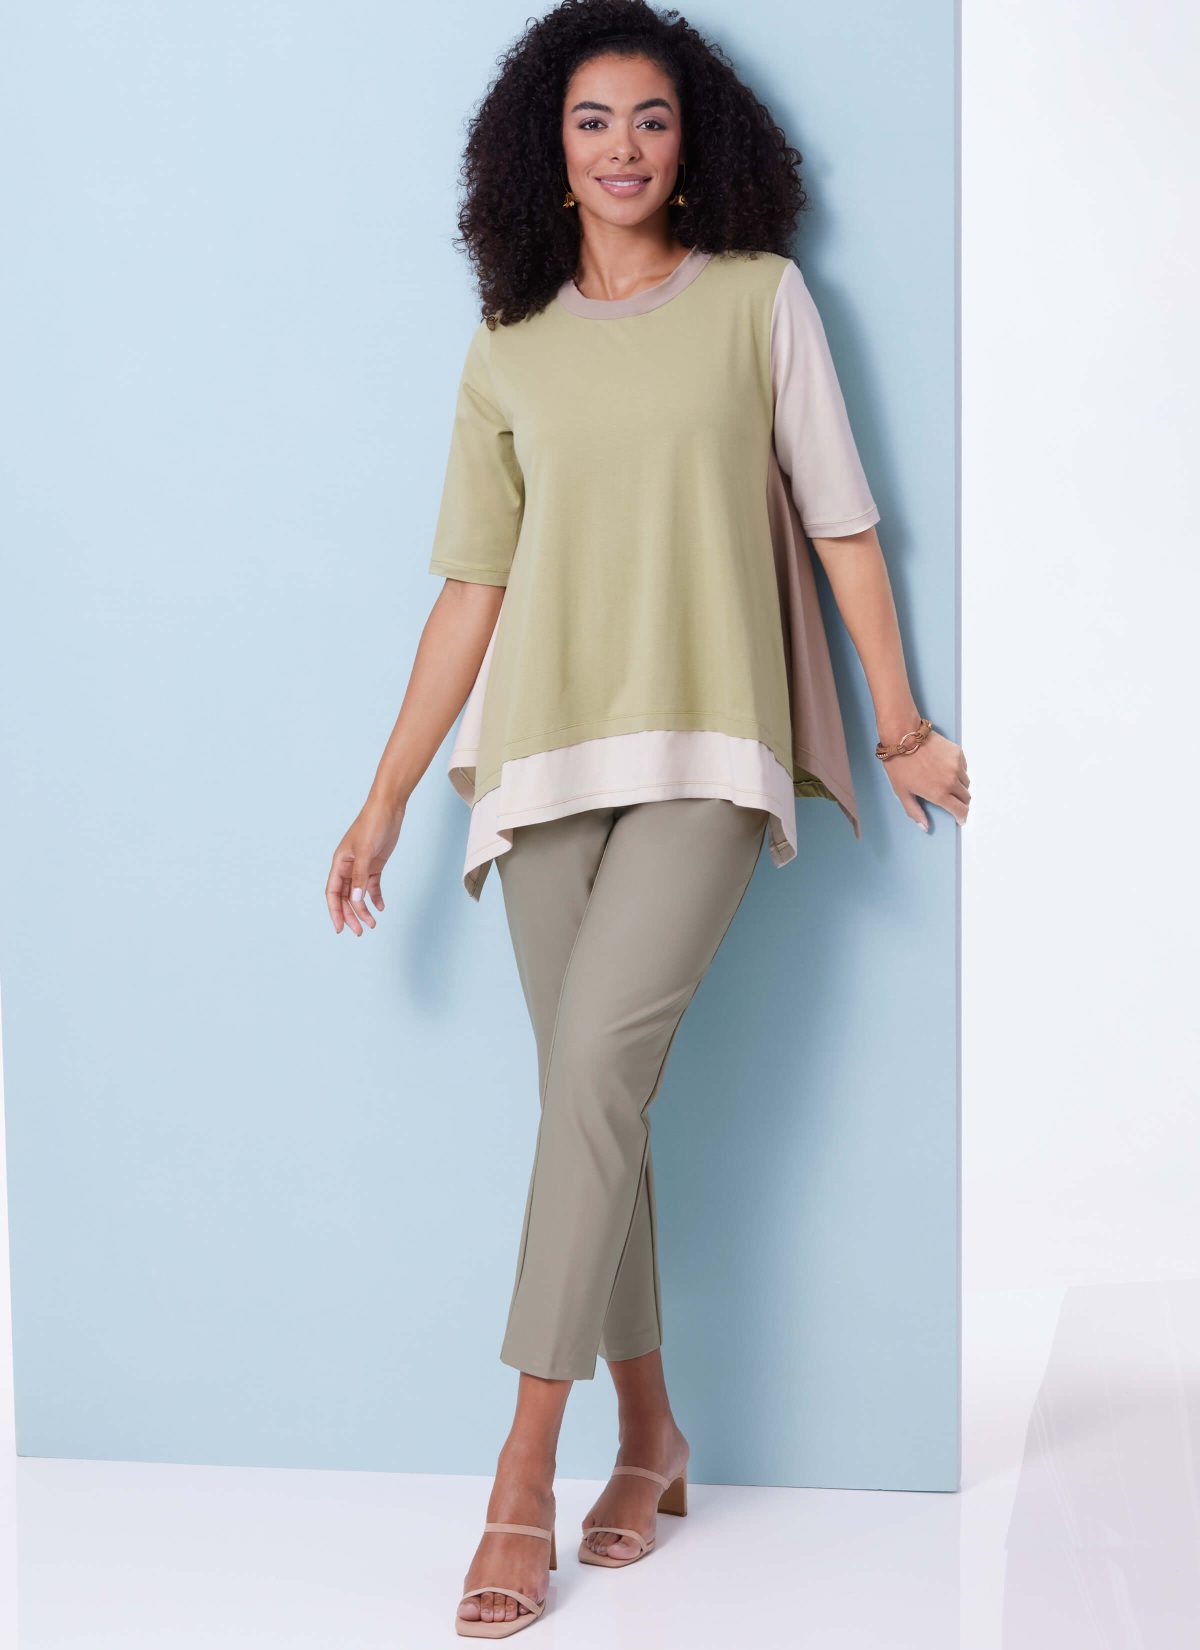 Butterick Sewing Pattern B6981 Misses' Tops by Katherine Tilton